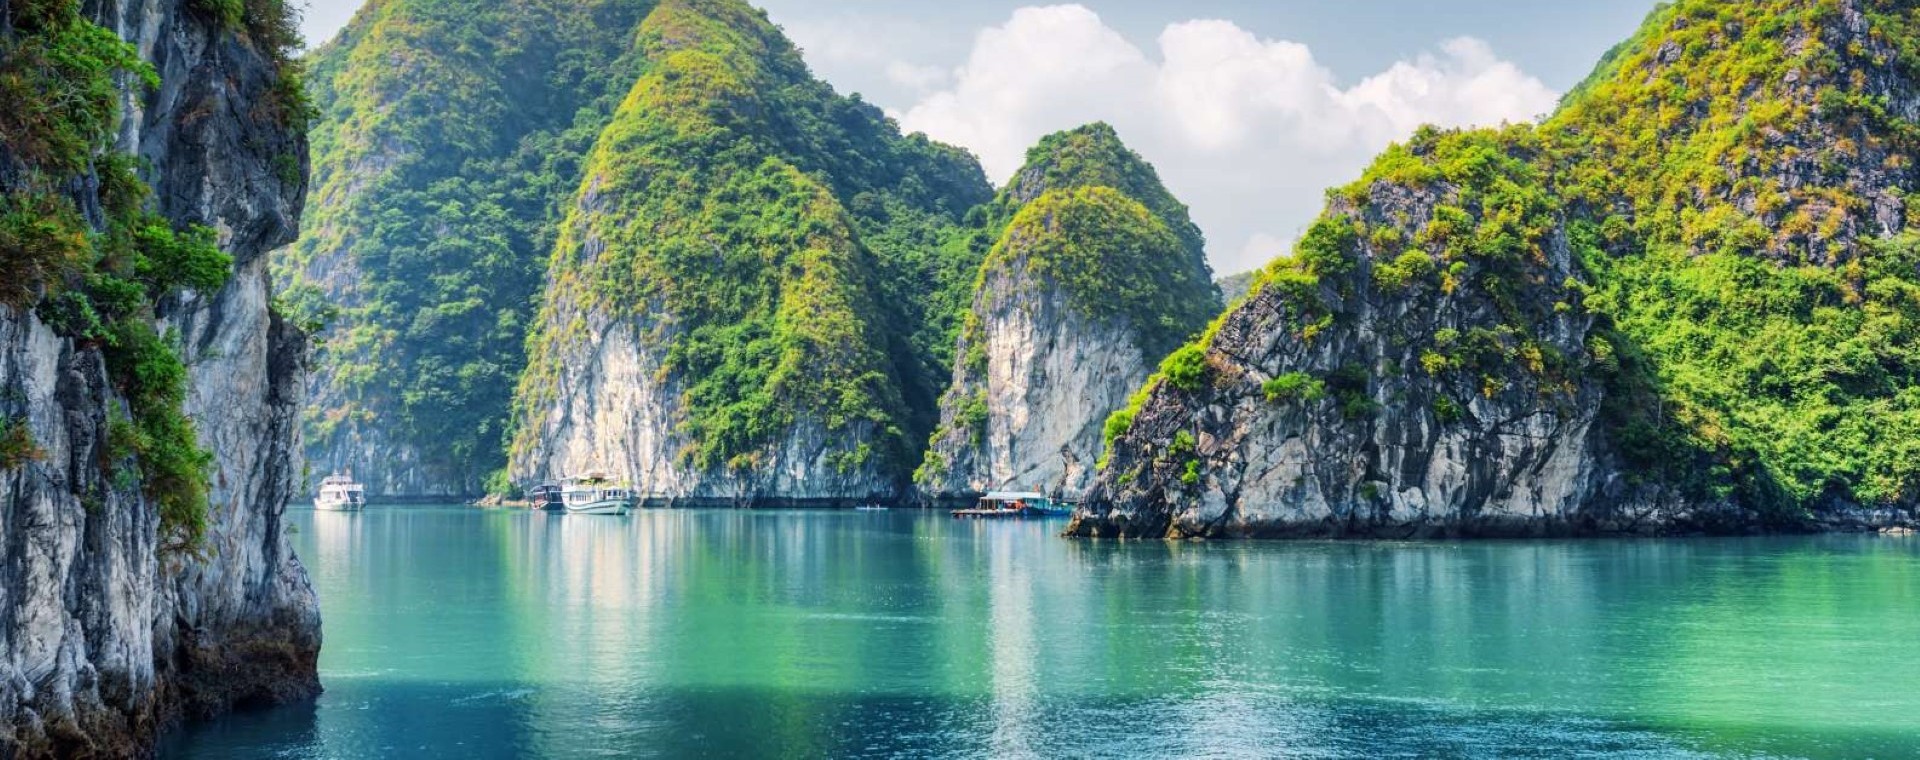 HANOI - PRIVATE DAY TRIP TO HALONG BAY